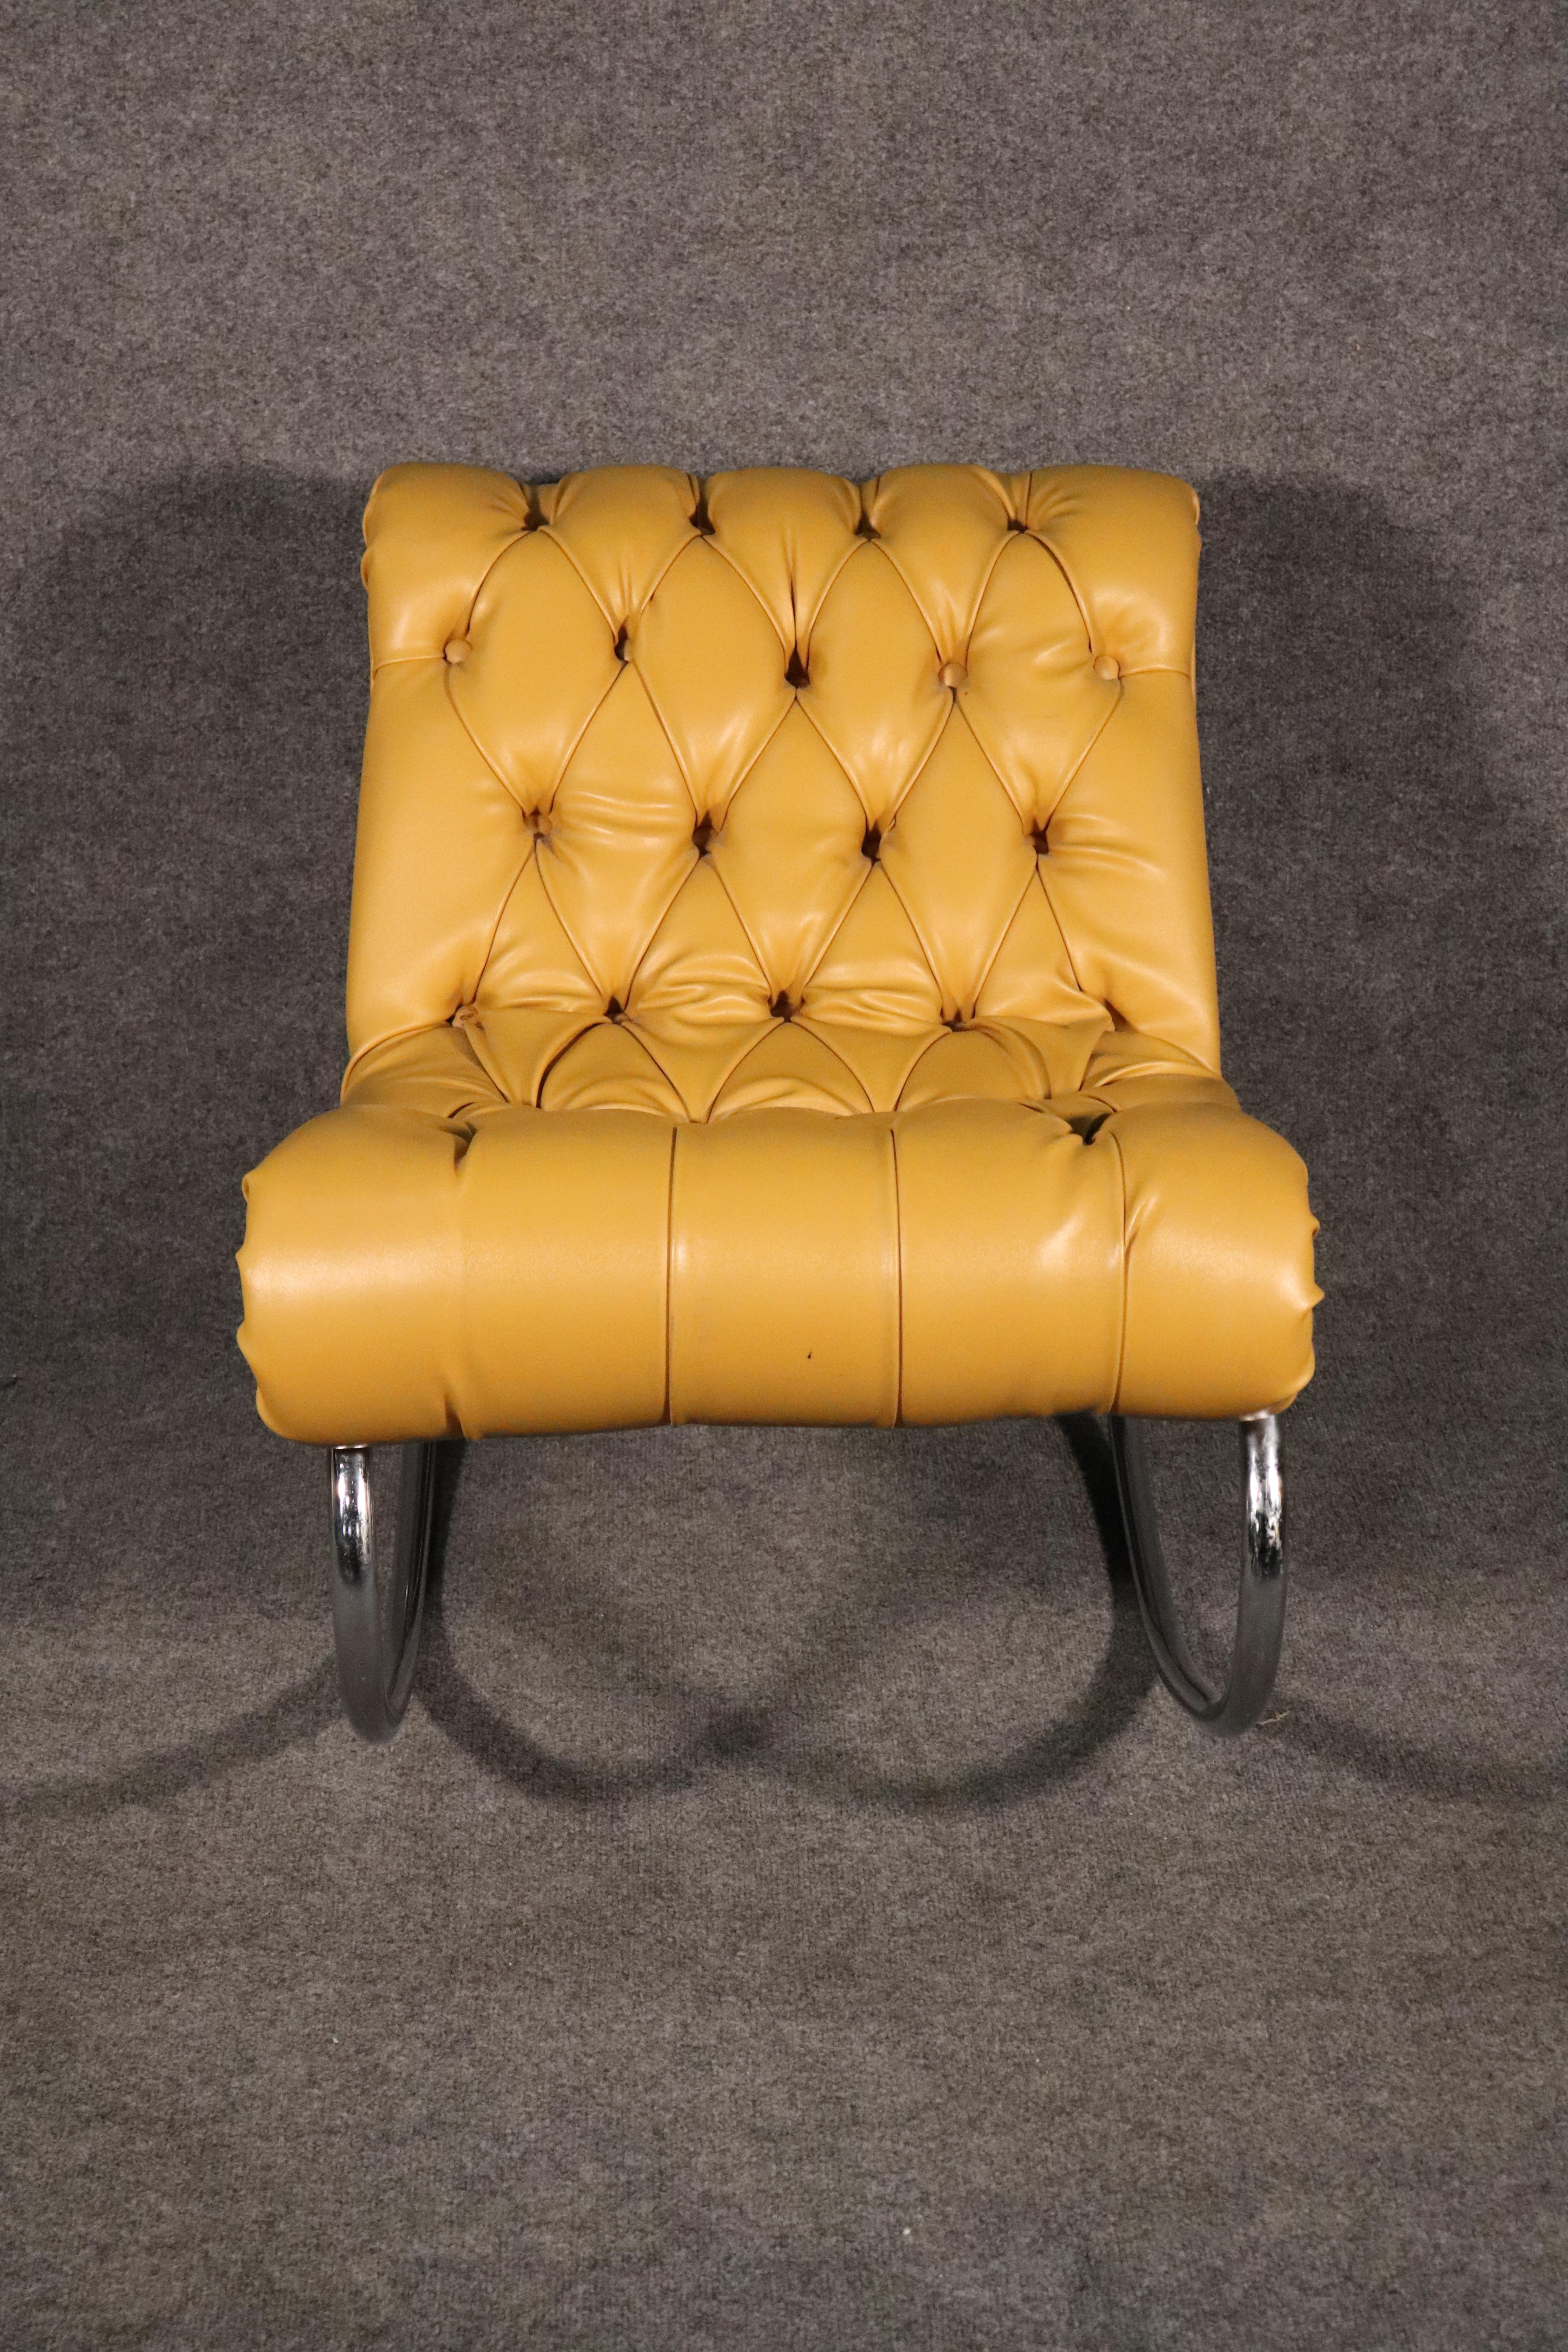 Tufted leather rocker with polished chrome frame. Great mix of modern and chesterfield style.
Please confirm location.